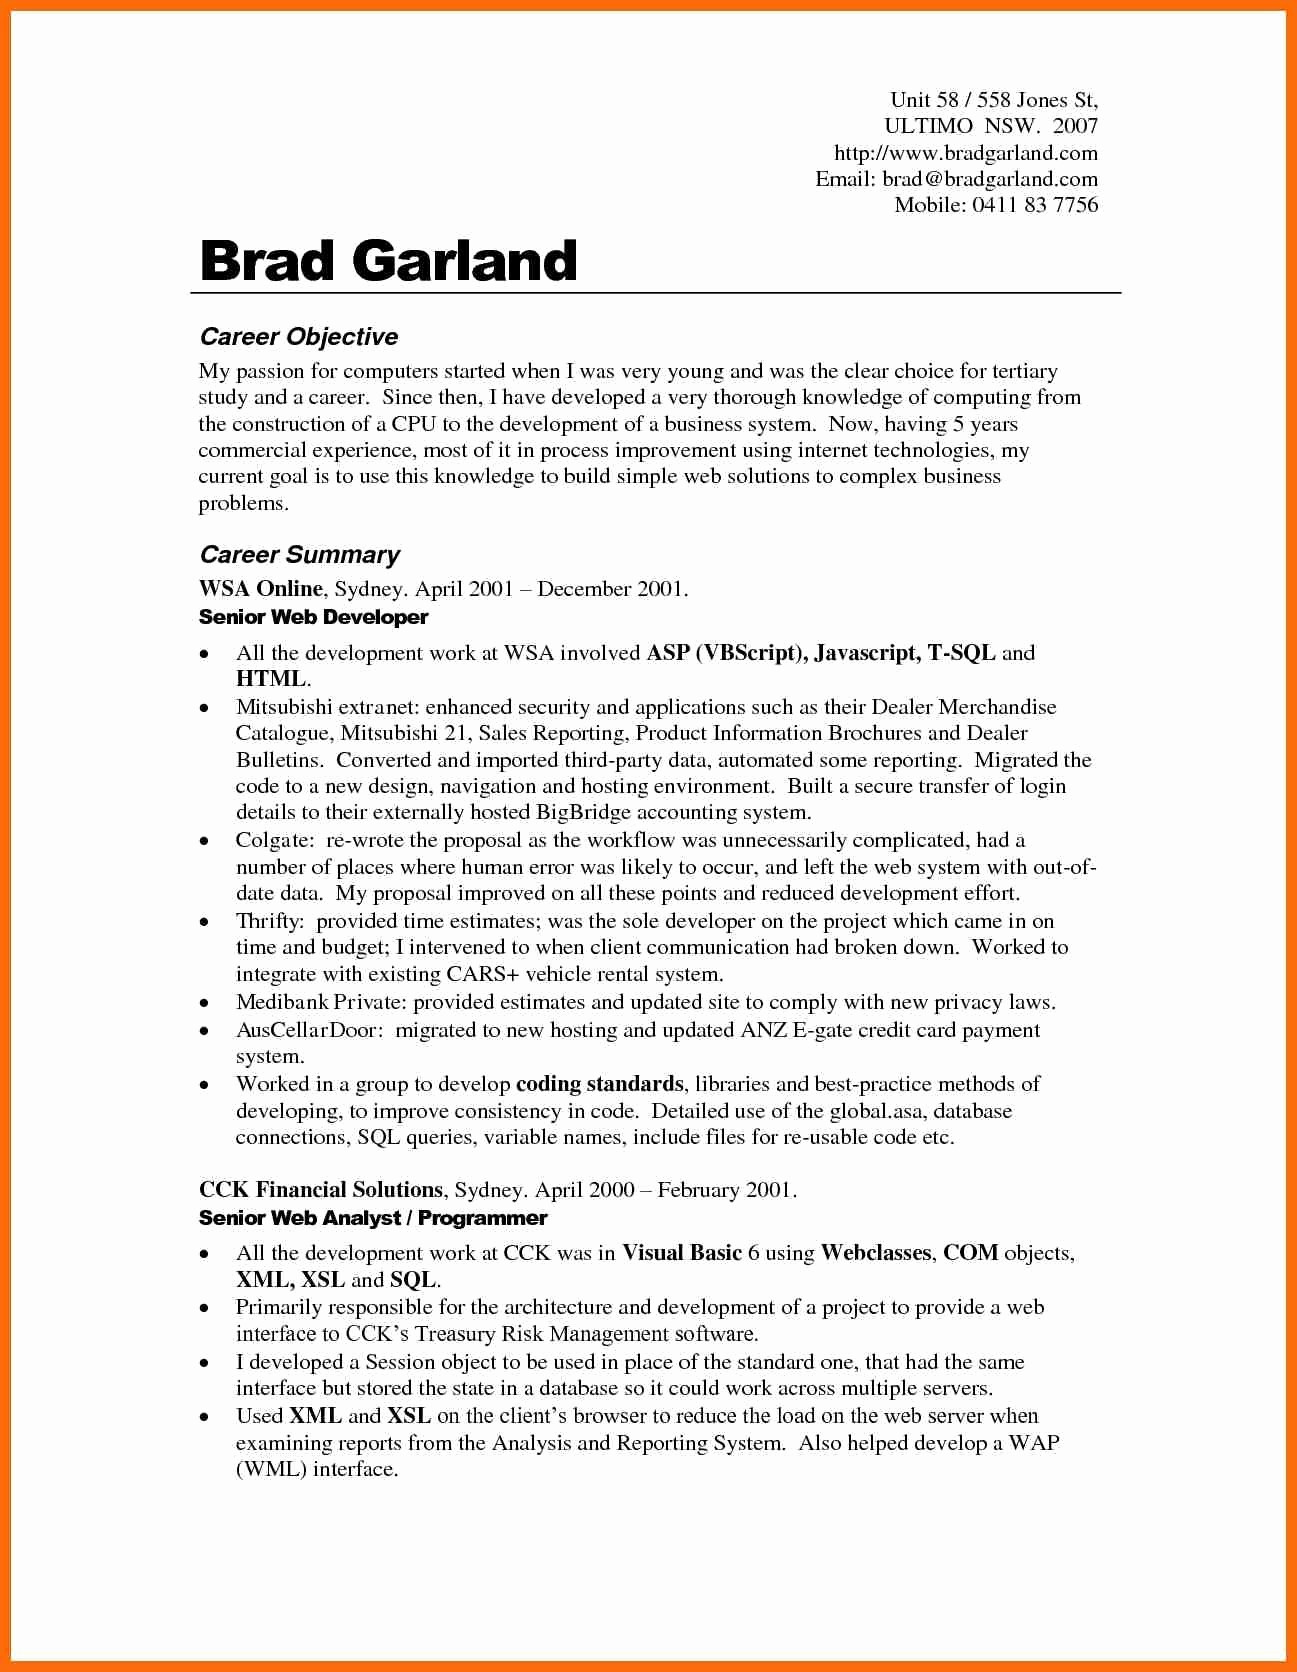 Resume Objective Examples  Sample Resume Objectives Career Change Career Change Resume Objective